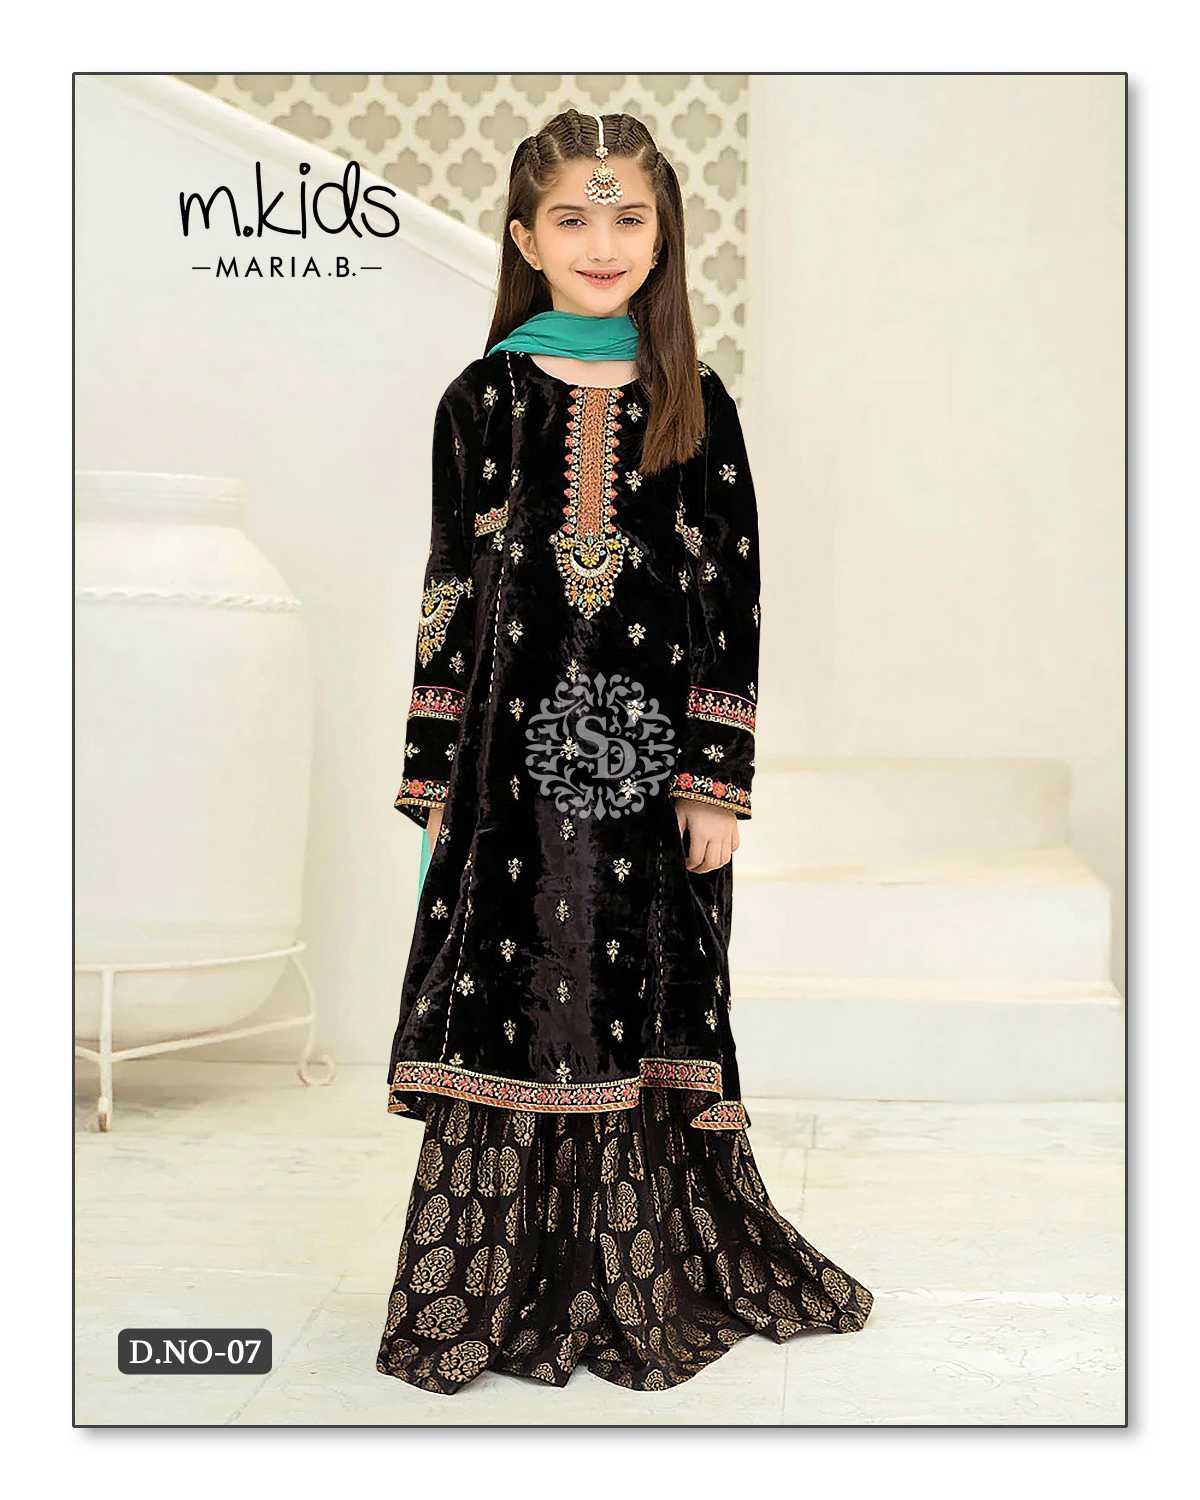 SAI DRESSES PRESENT D.NO 07 READY TO WINTER WEAR GHARARA STYLE DESIGNER PAKISTANI KIDS COMBO SUITS IN WHOLESALE RATE IN SURAT